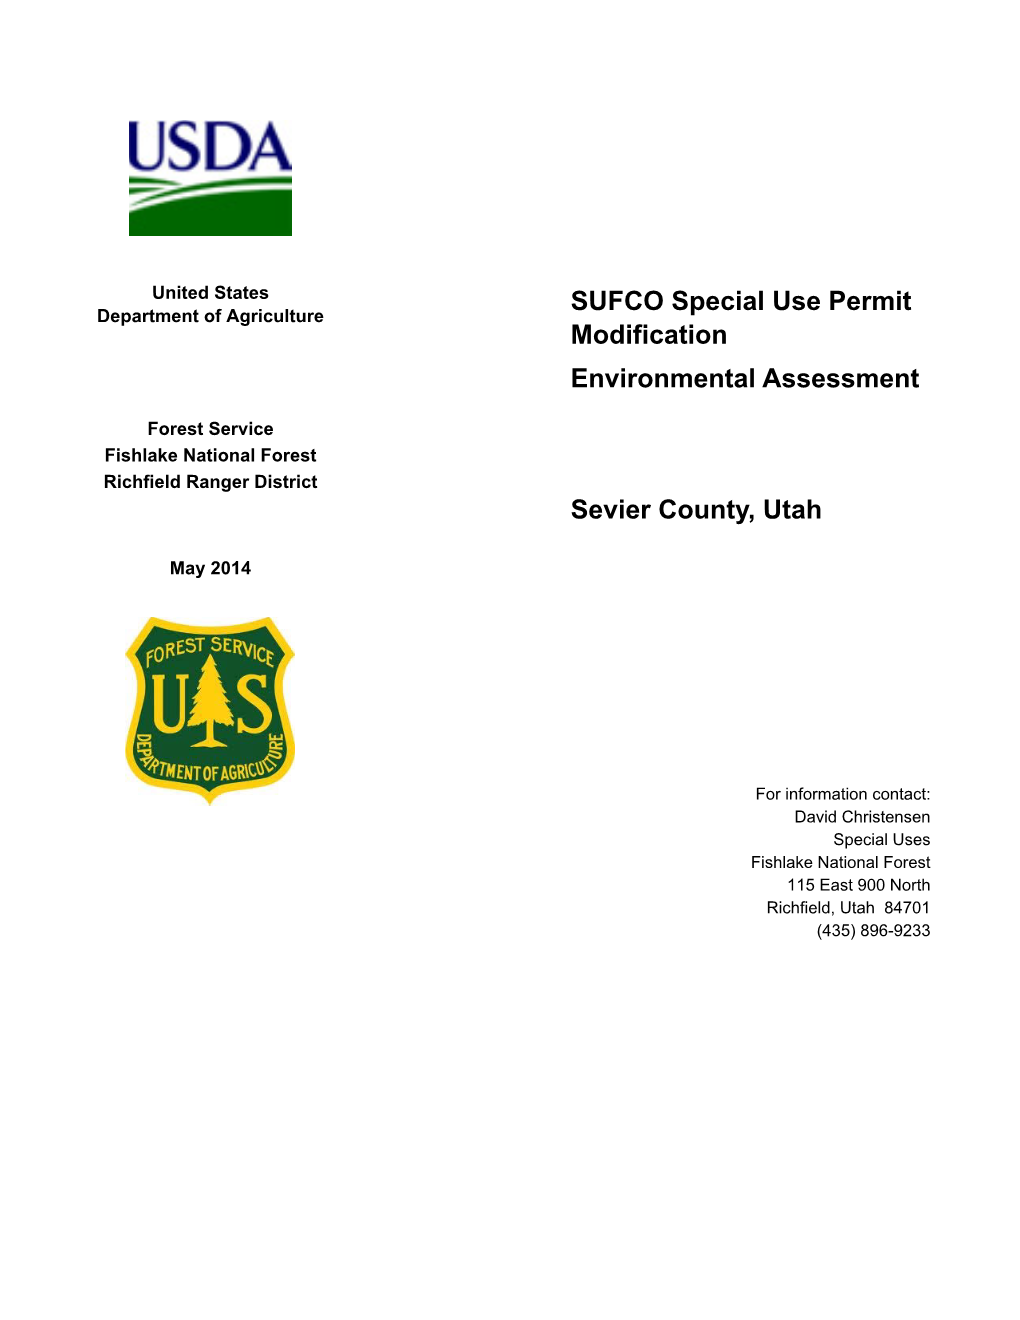 SUFCO Special Use Permit Modification Environmental Assessment Sevier County, Utah